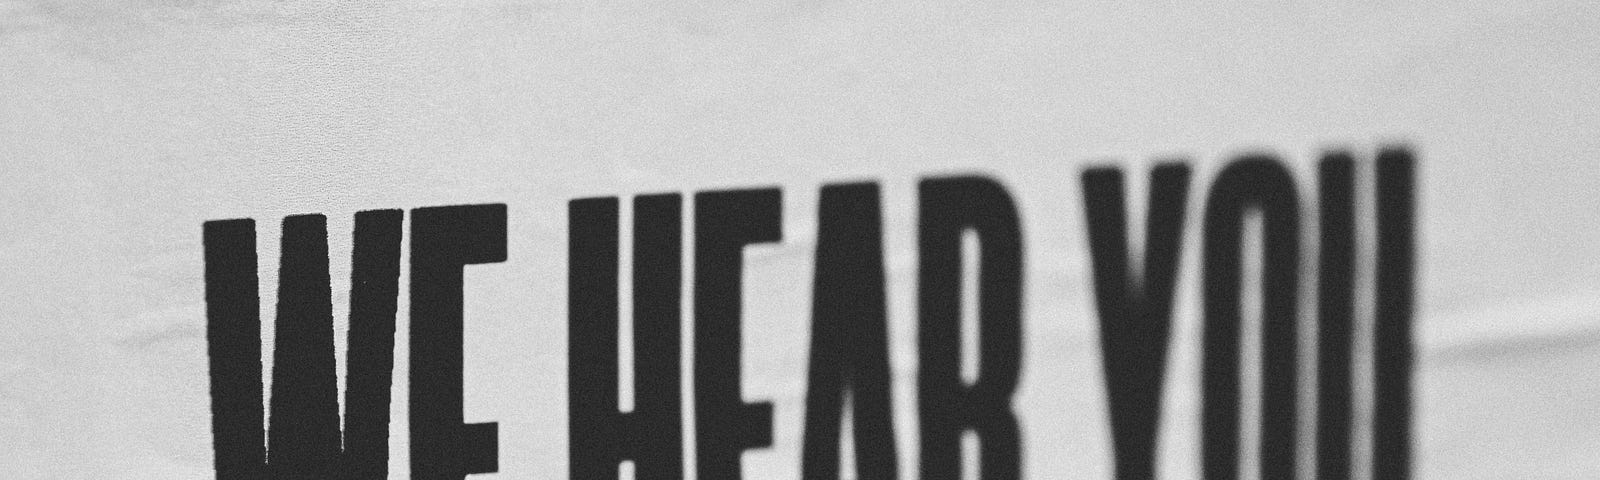 White poster with the words “We hear you” written in black.